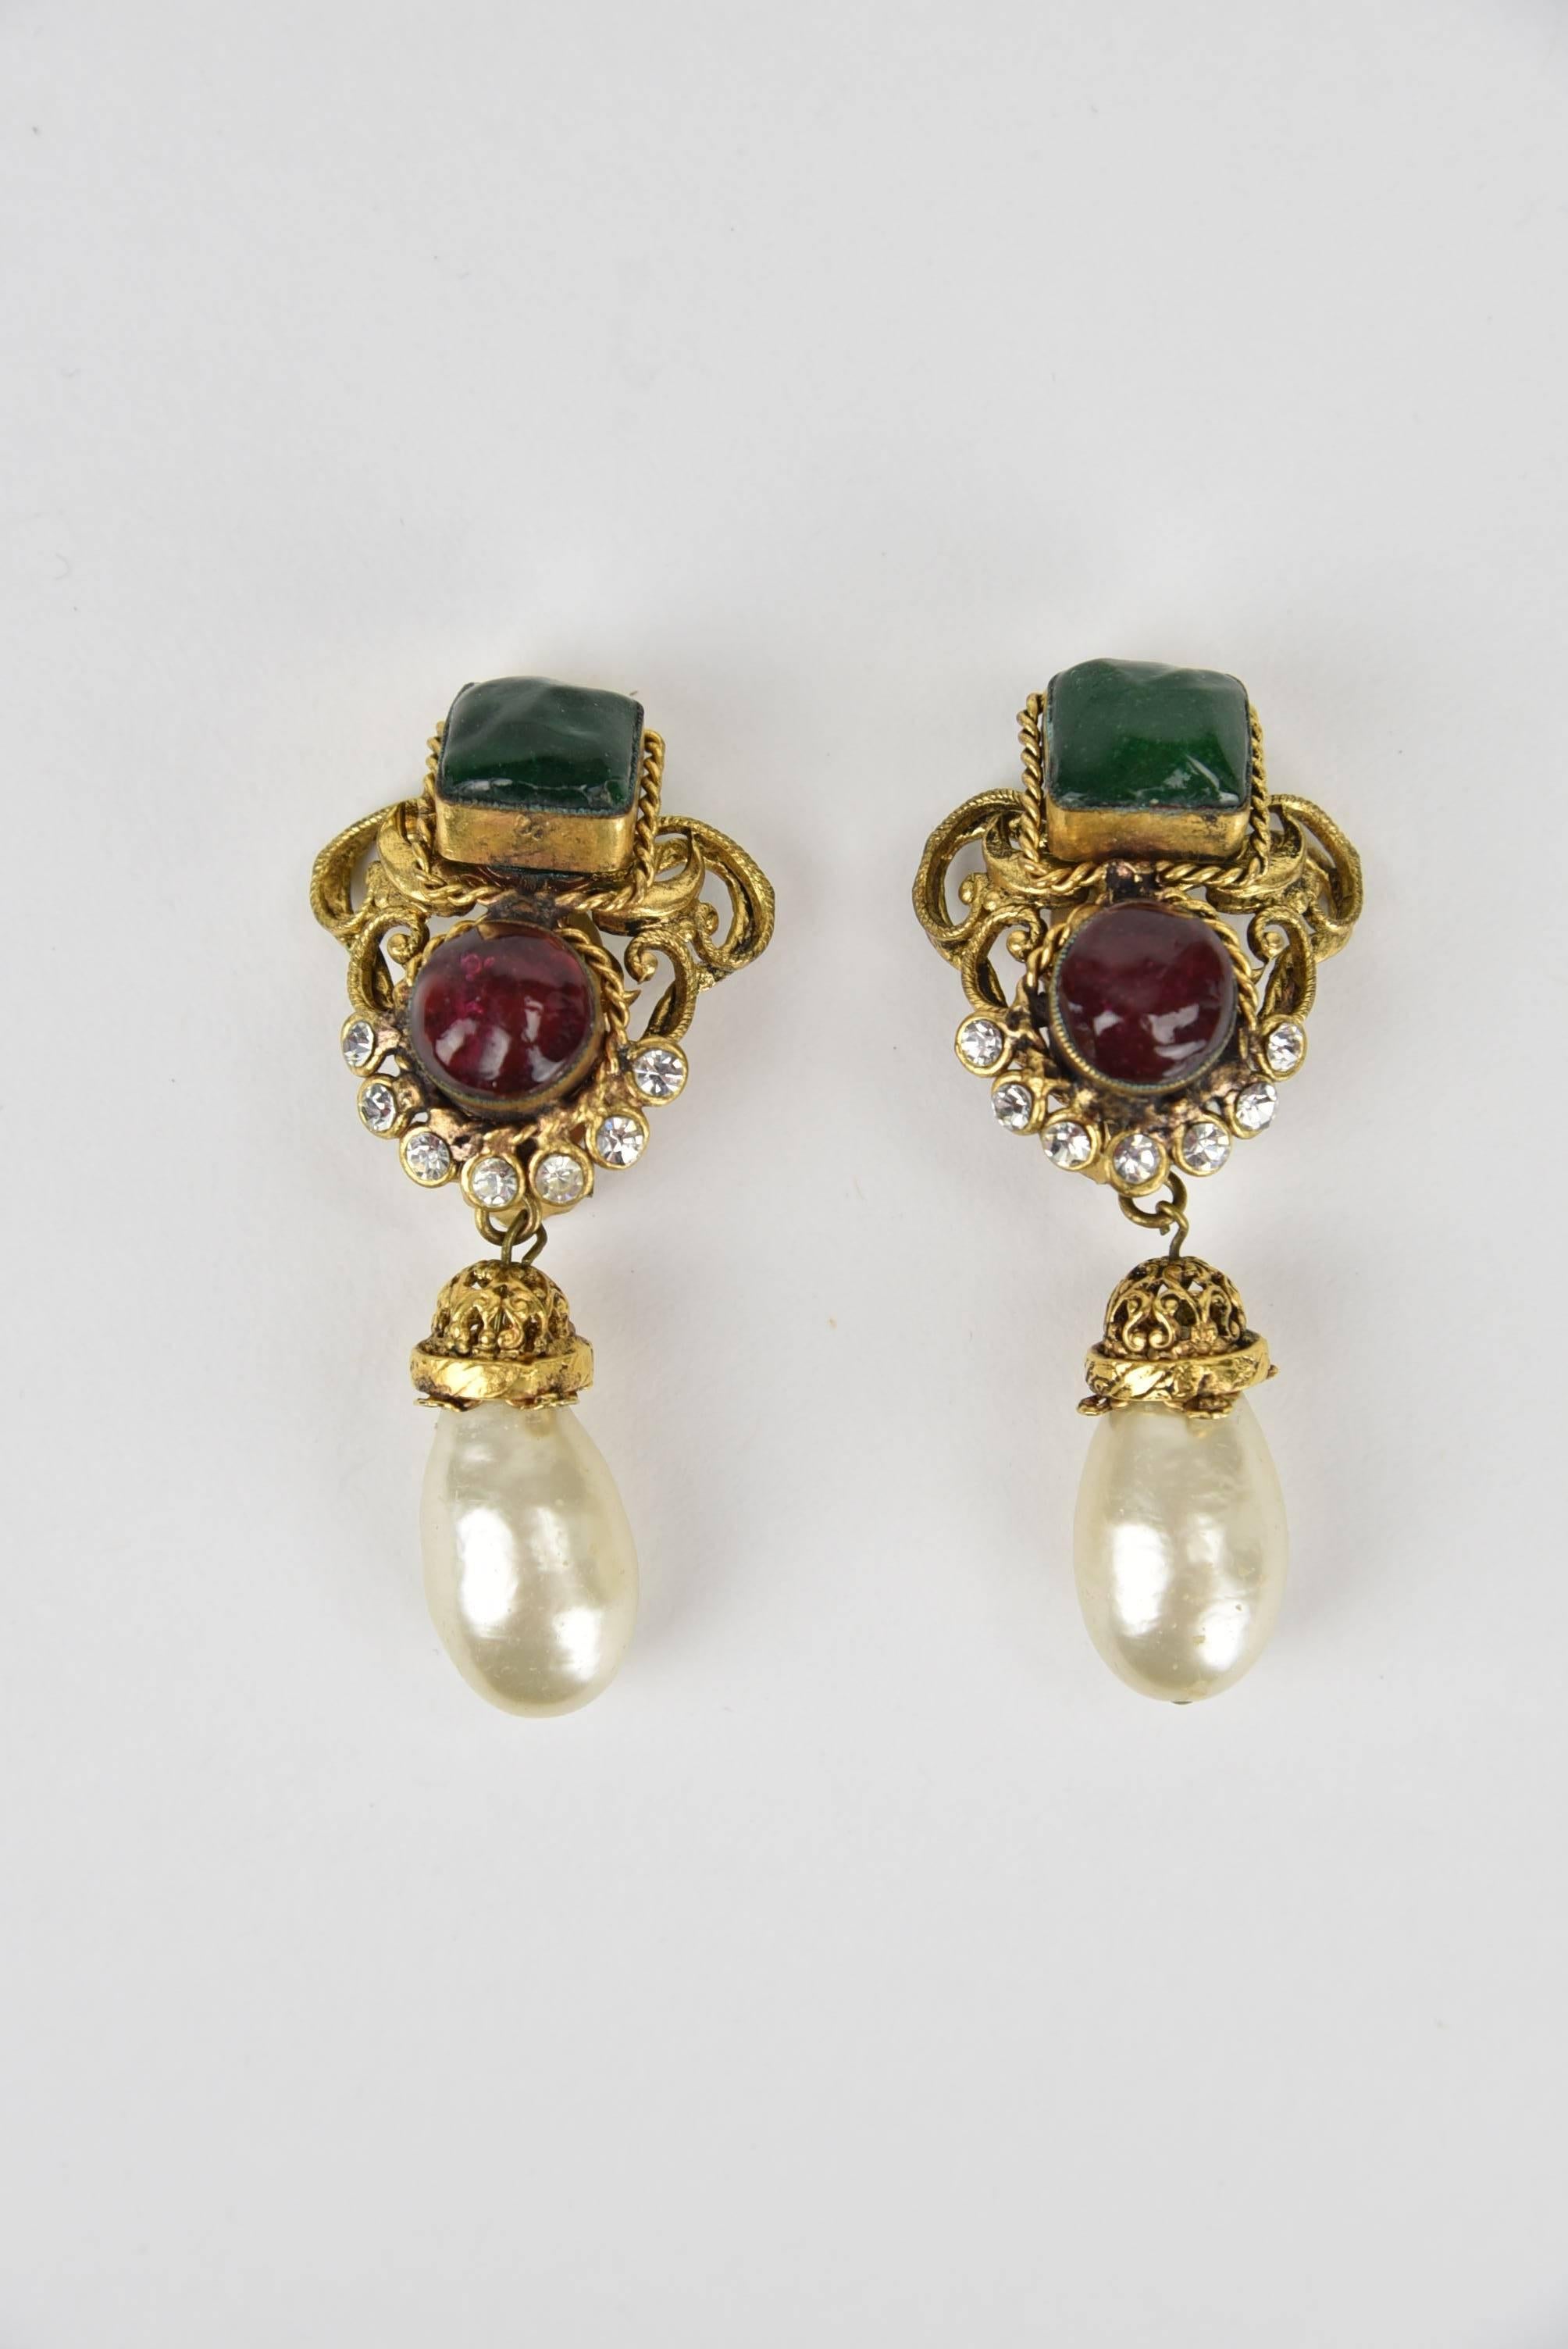 Gorgeous gilt, pearls and poured glass drop earrings. Measurements:  Height 2.5", Width 1.25", Depth .75".